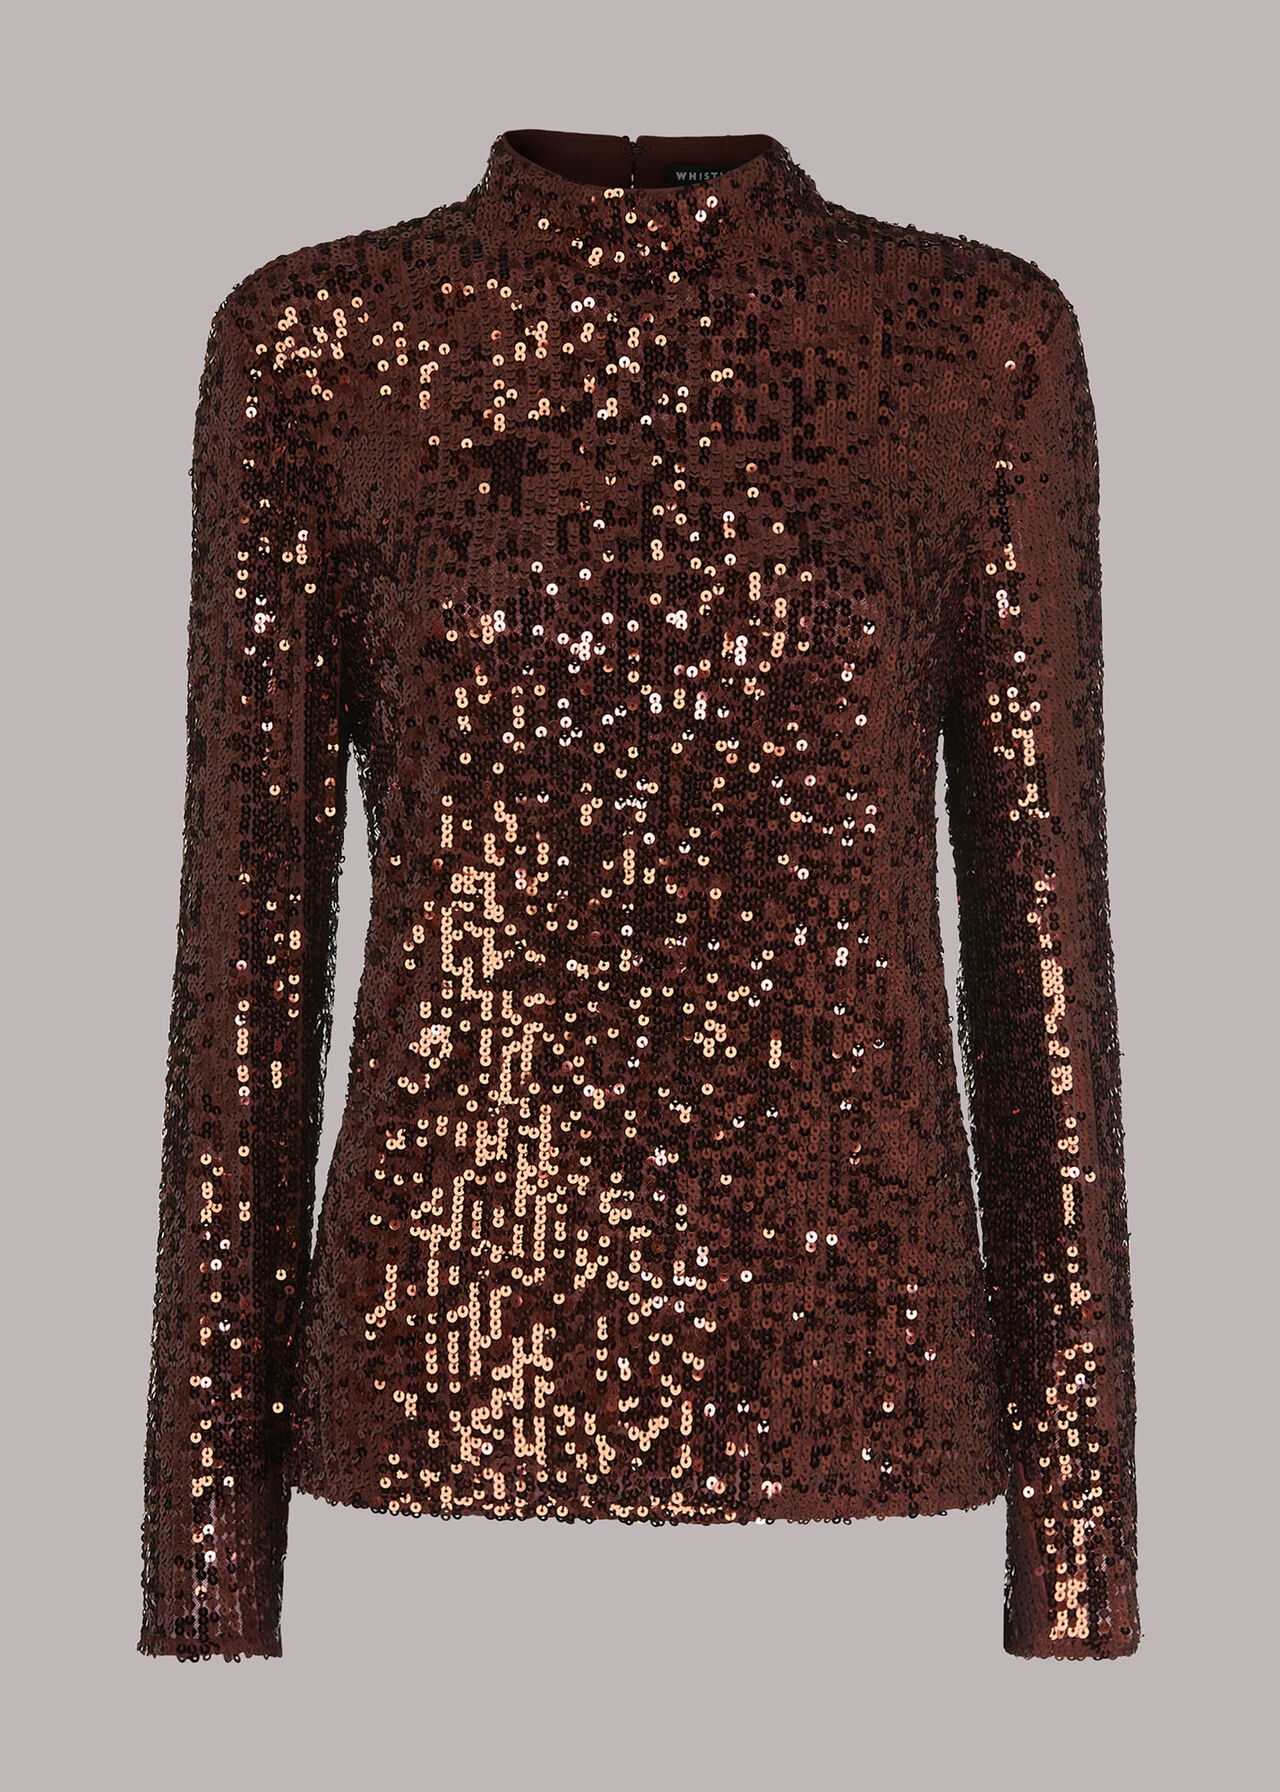 Chocolate High Neck Sequin Top | WHISTLES